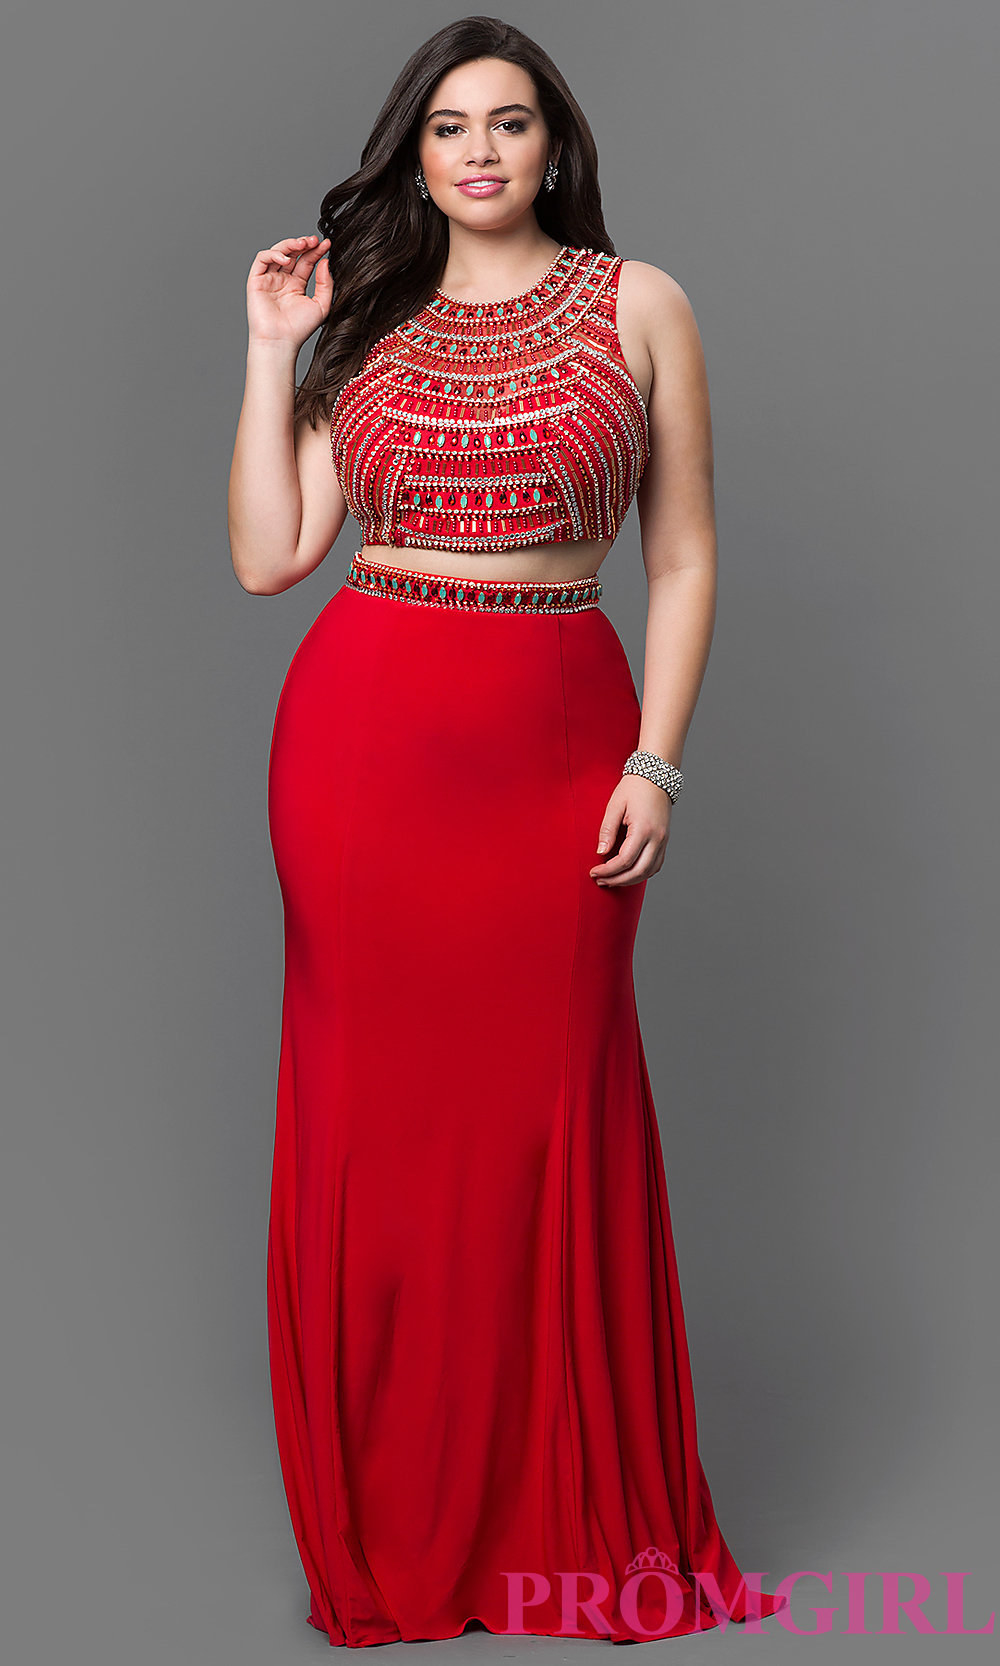 top rated prom dress websites